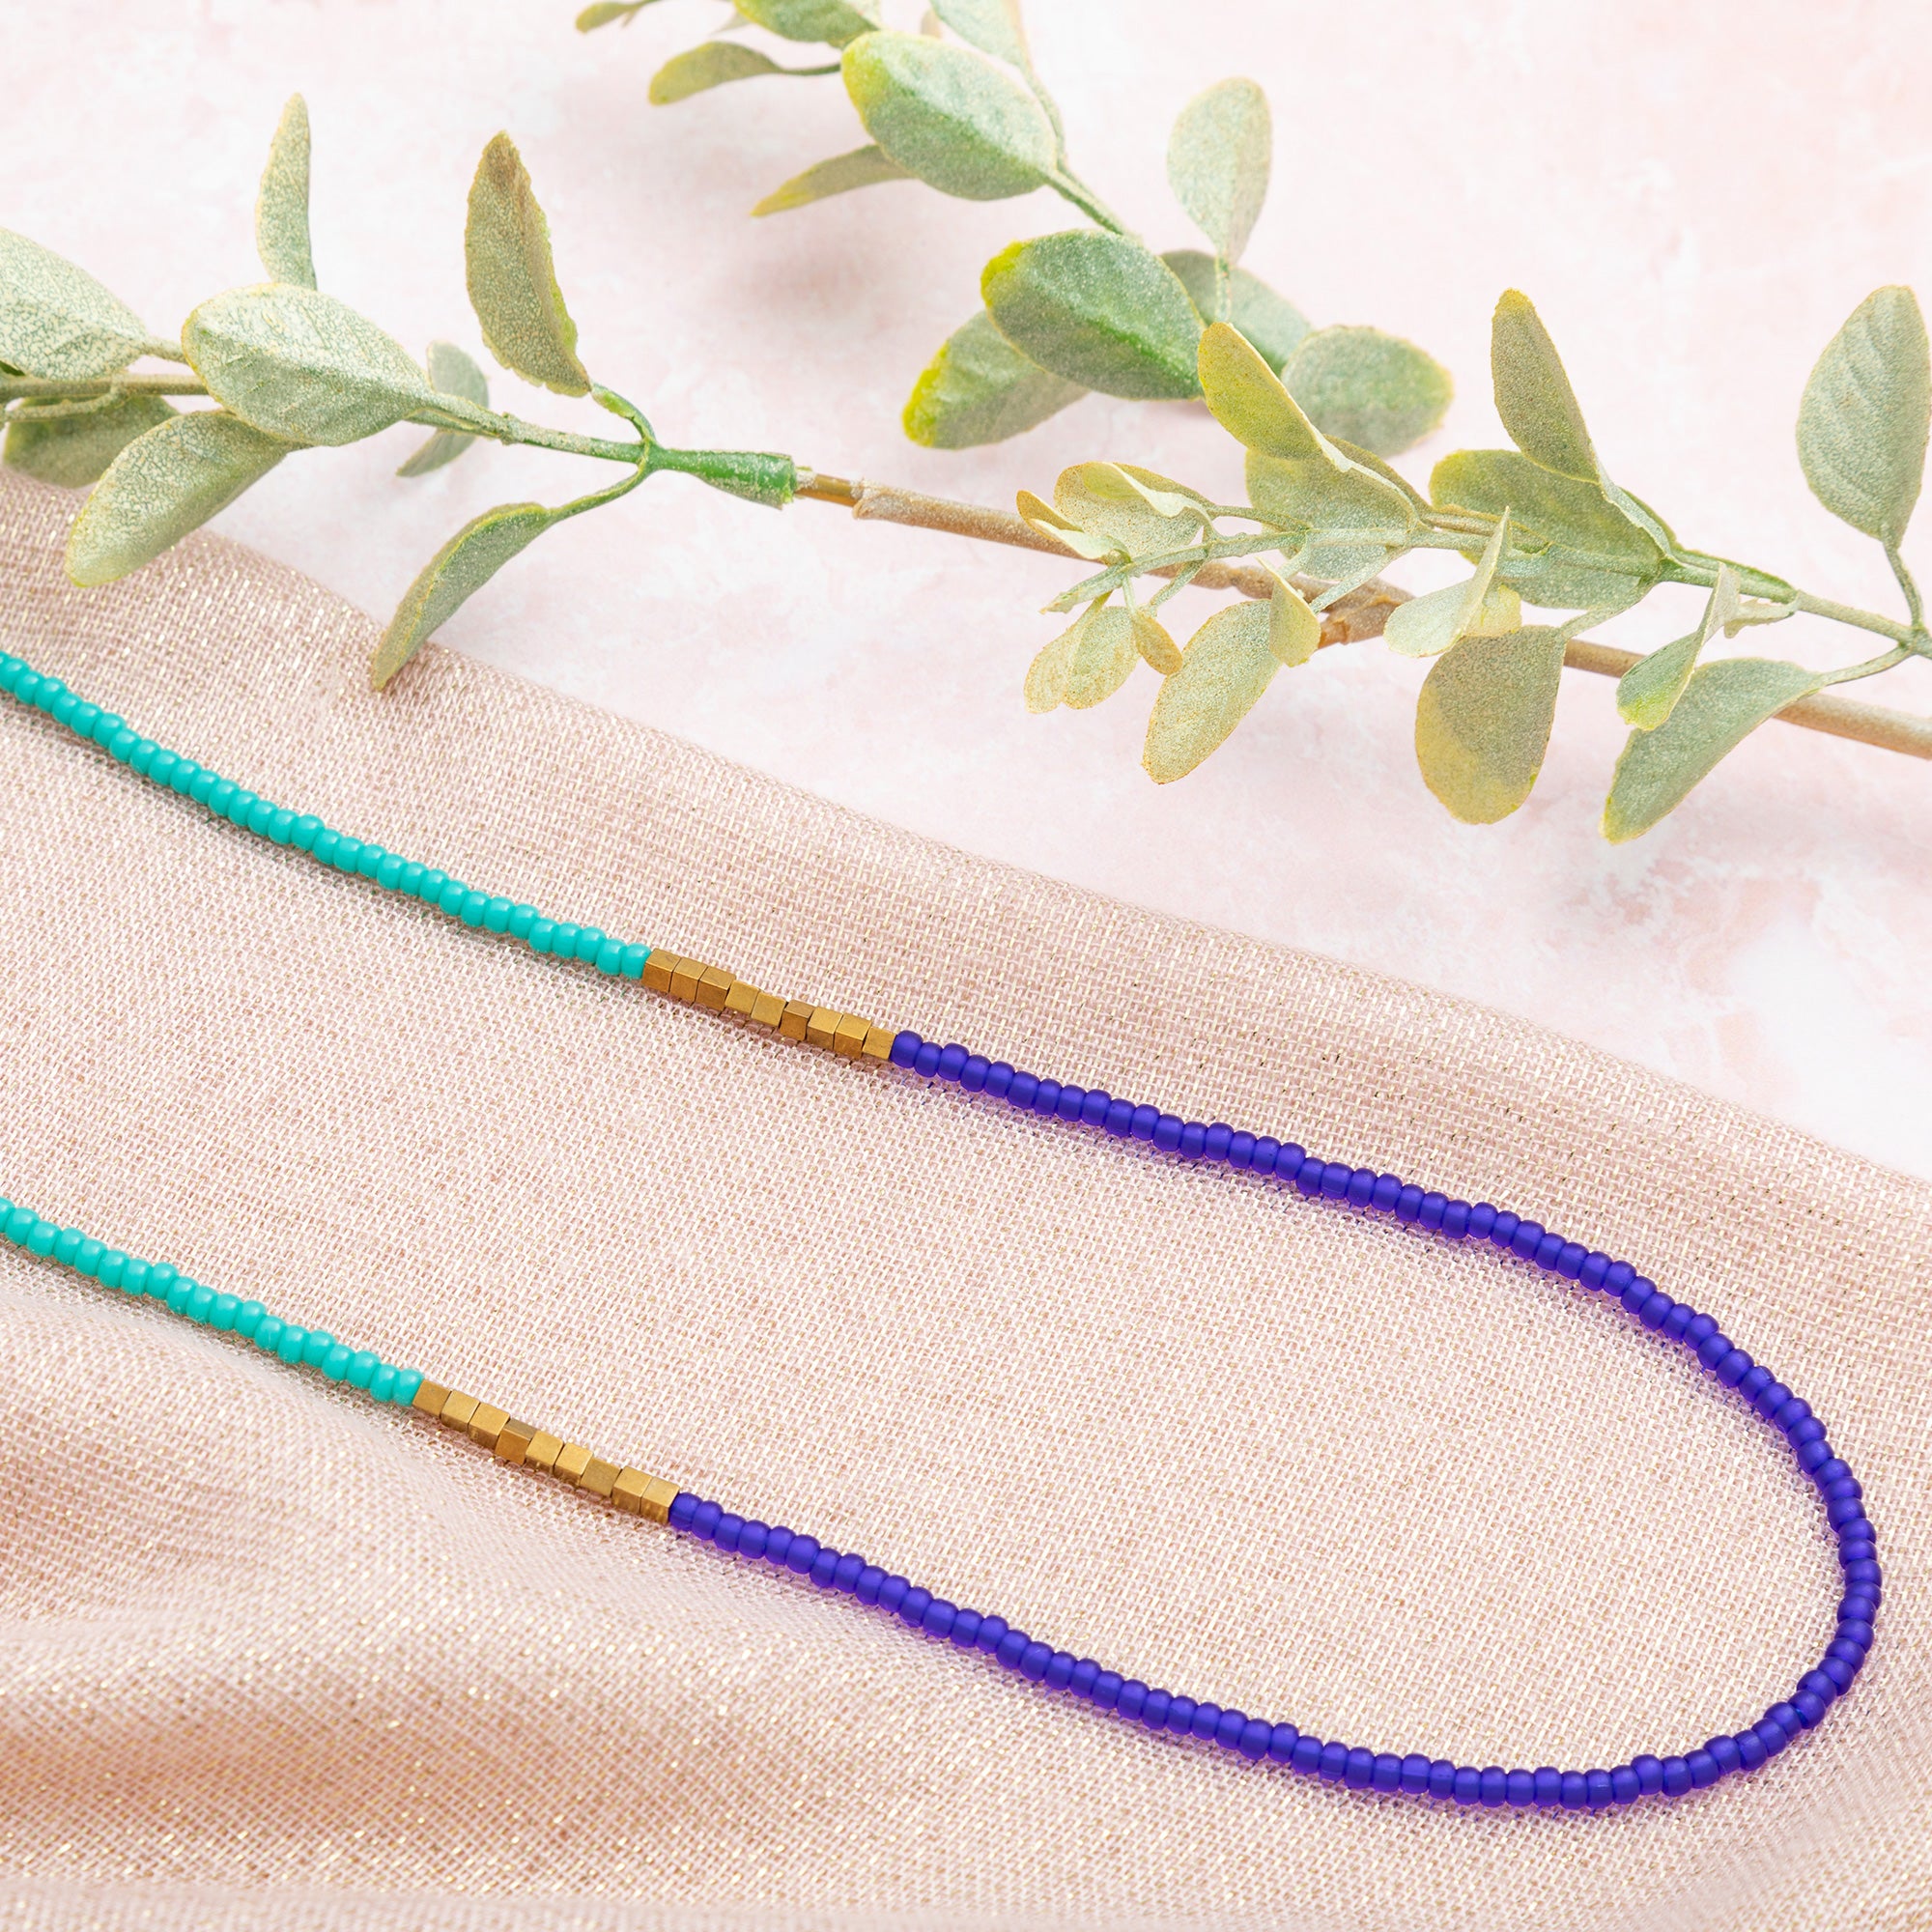 Iraqi Delicate Rope Necklace - Blue/Turquoise